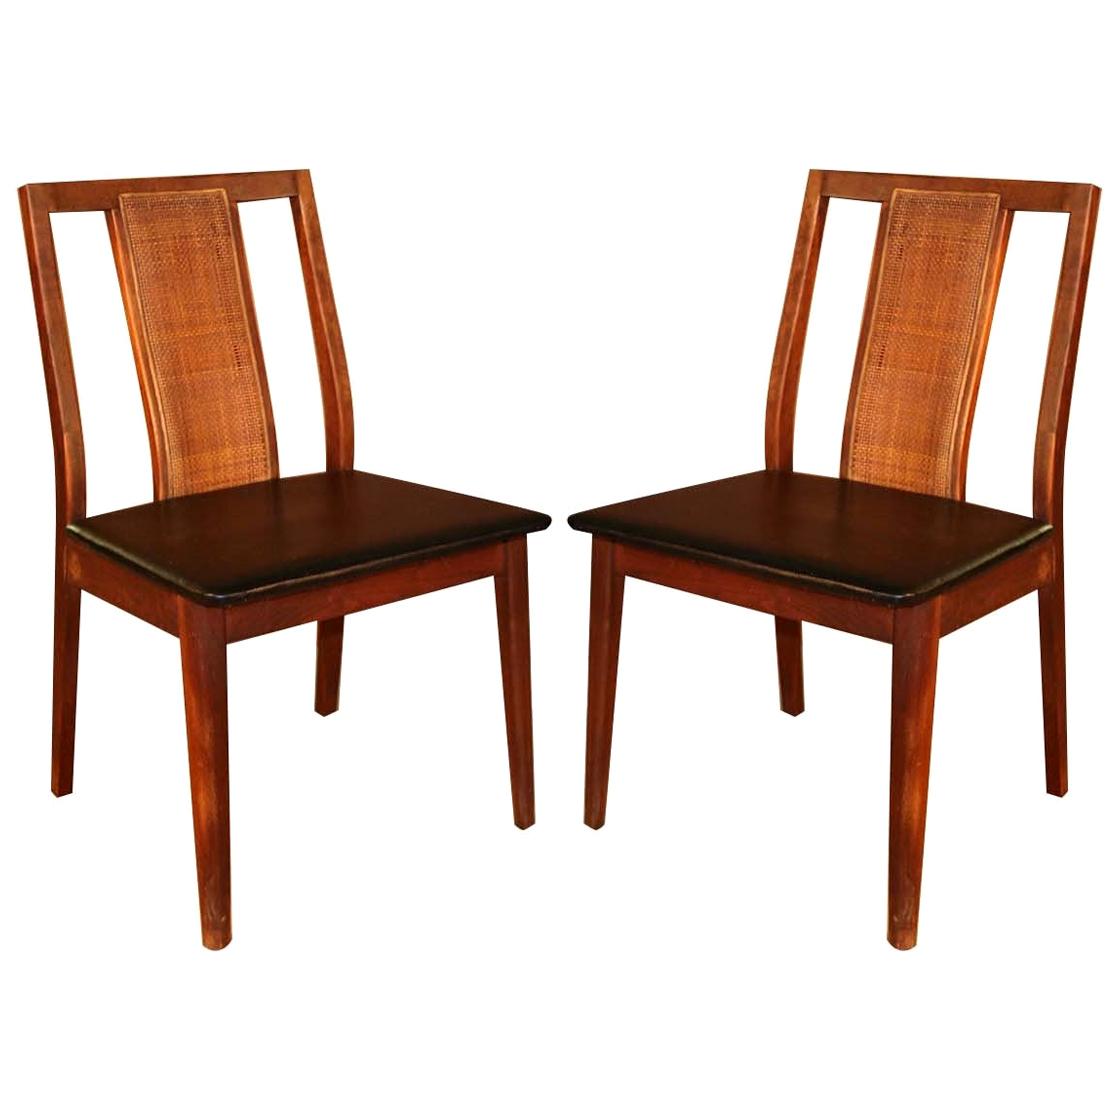 Pair of Midcentury Chairs in the Style of Edward Wormley